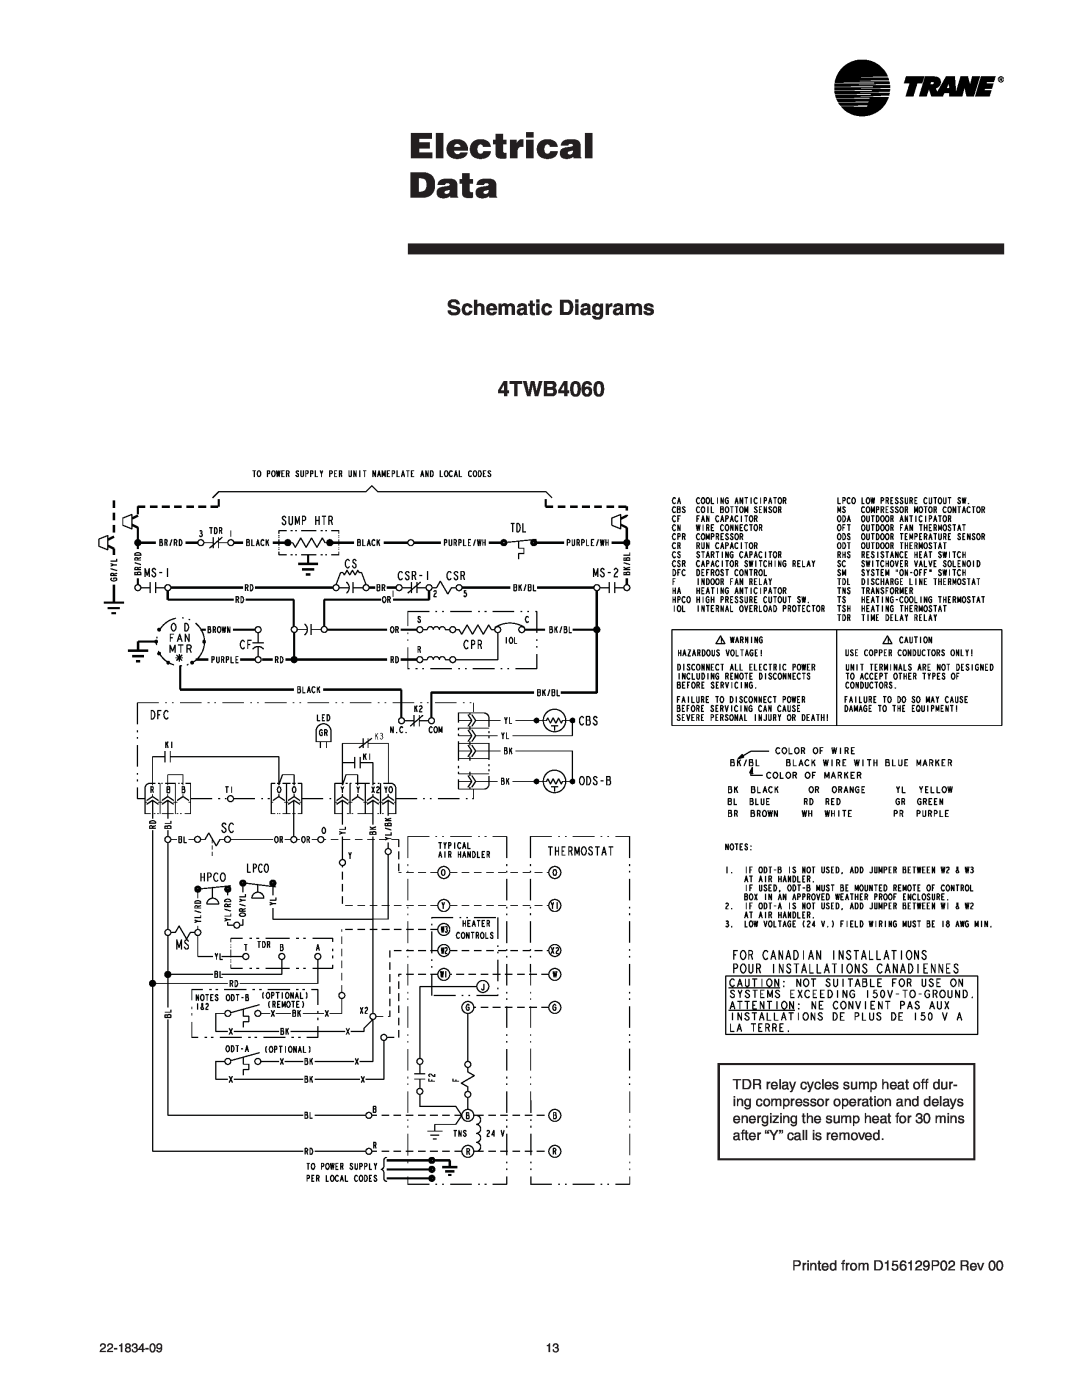 Trane manual Electrical Data, Schematic Diagrams 4TWB4060, Printed from D156129P02 Rev 